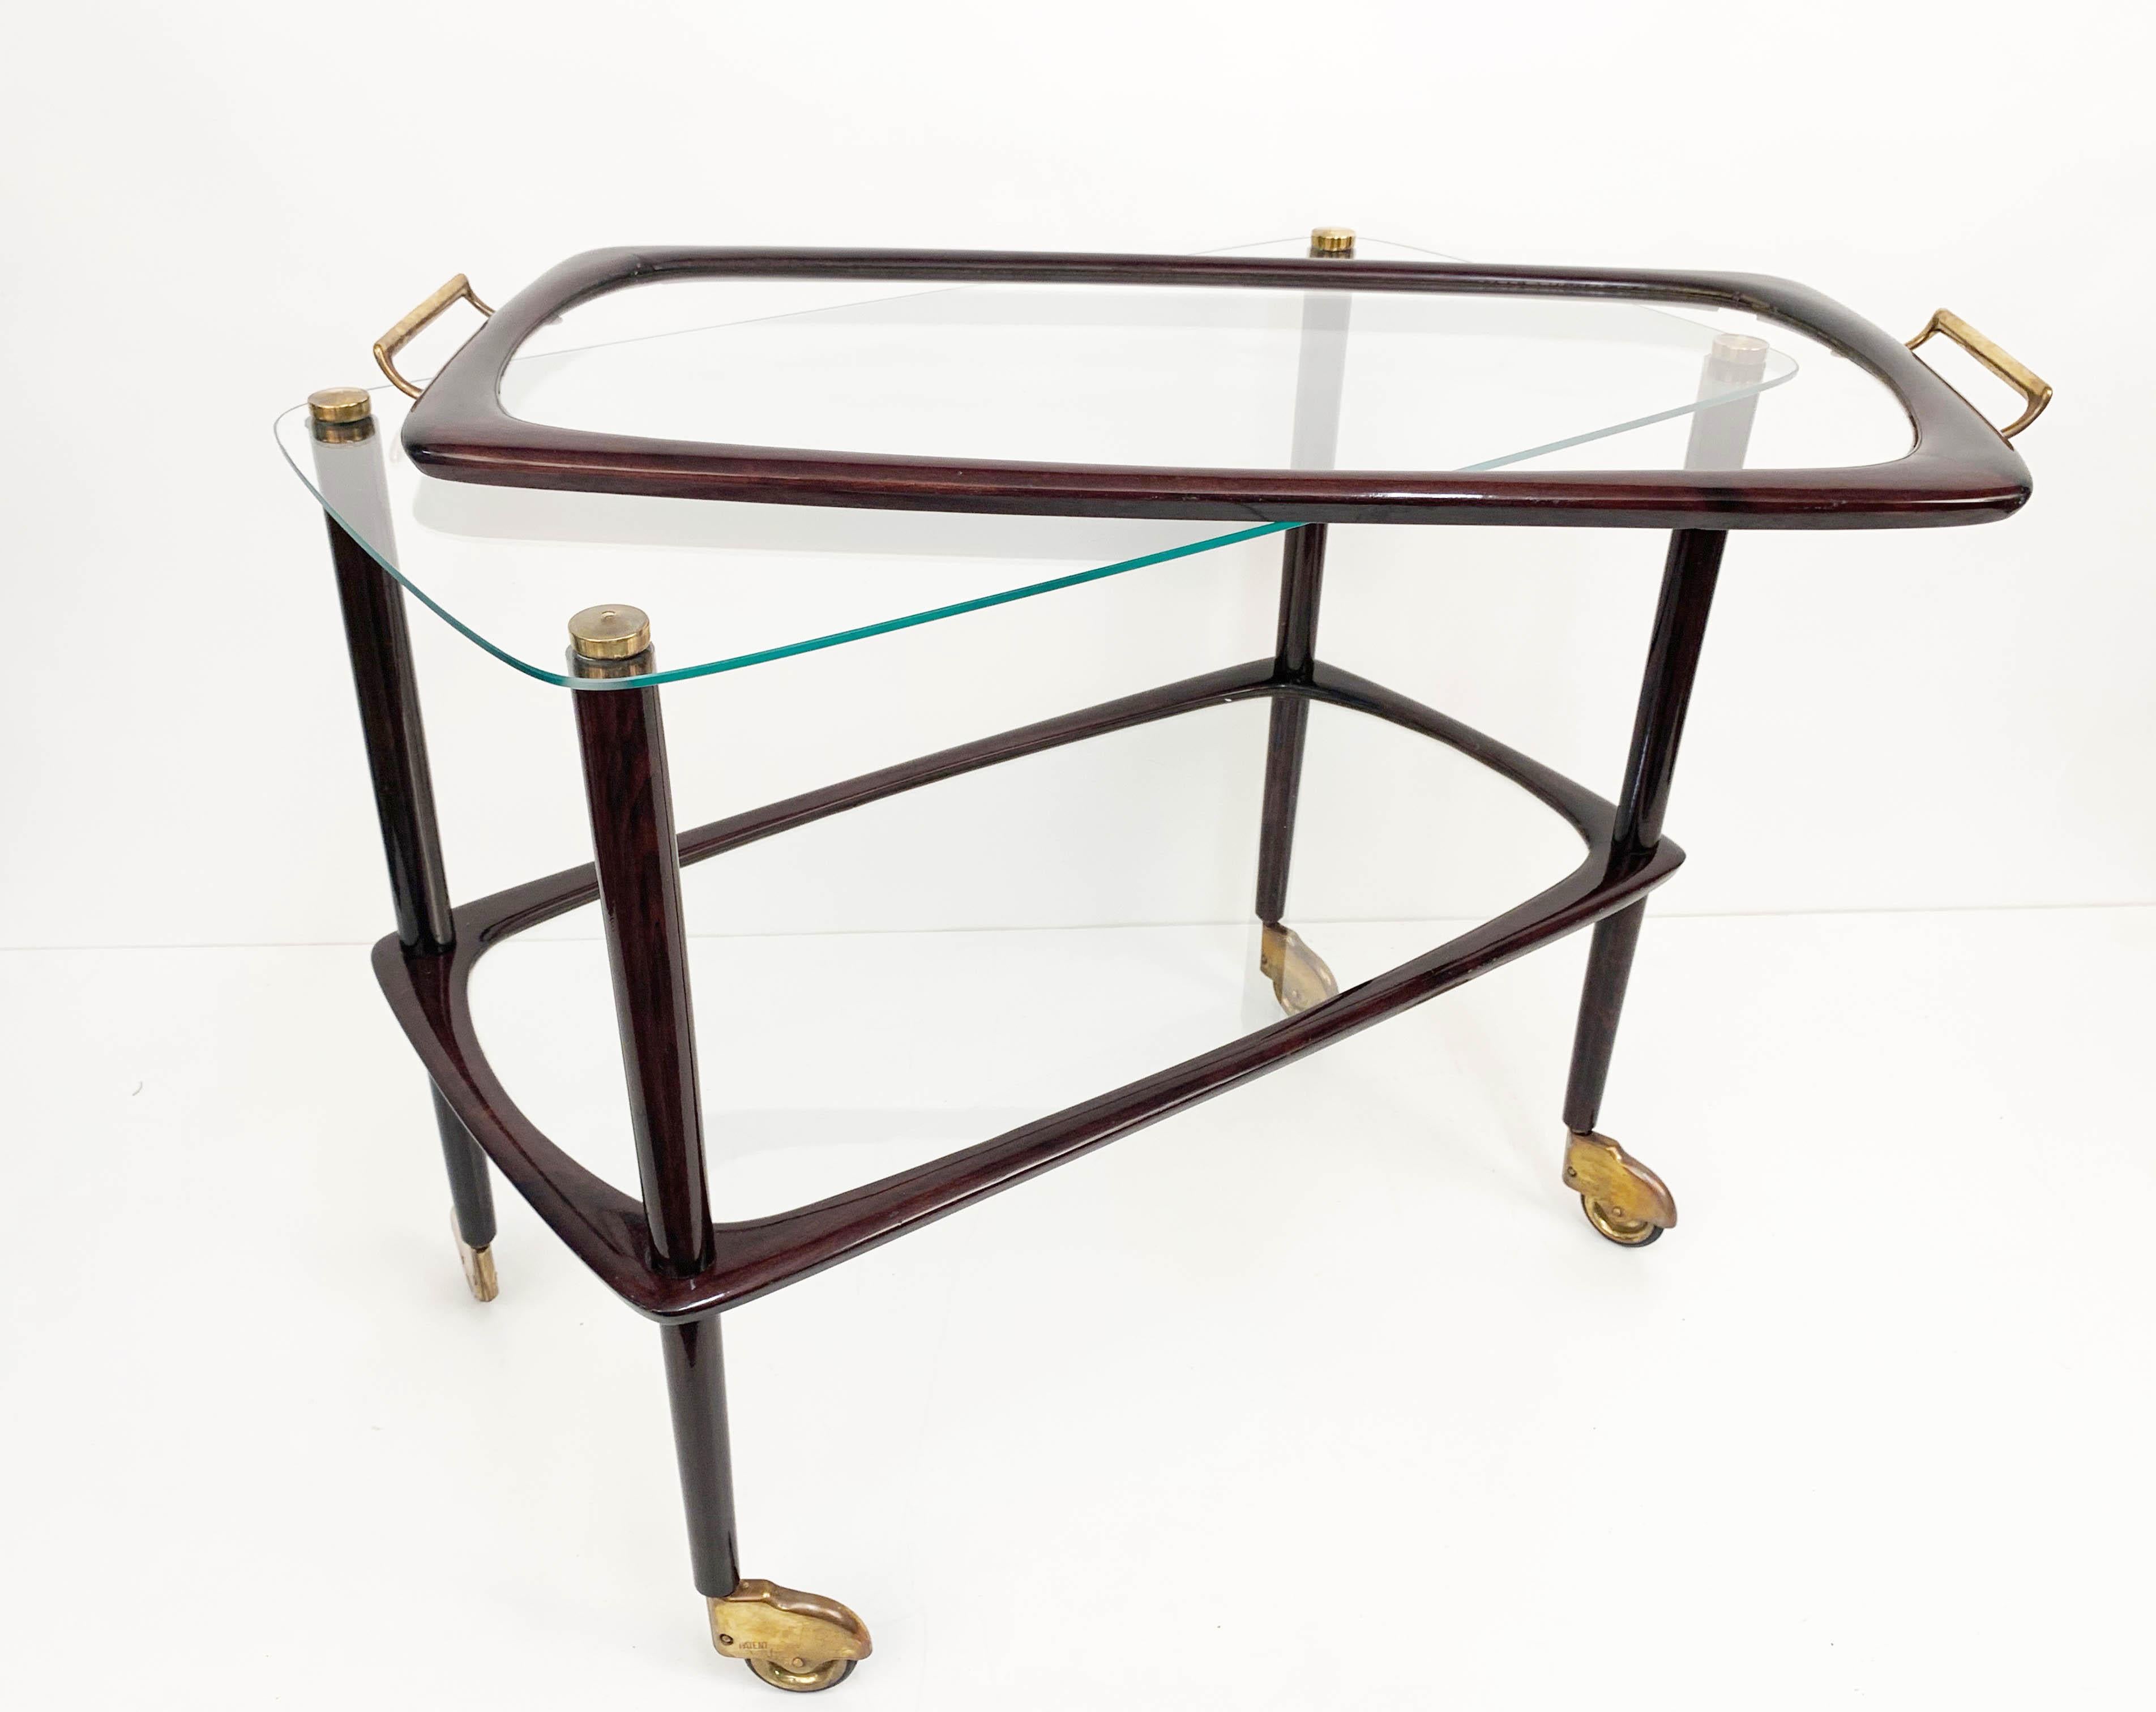 Midcentury Cesare Lacca Wood Italian Bar Cart with Glass Serving Tray, 1950s For Sale 8